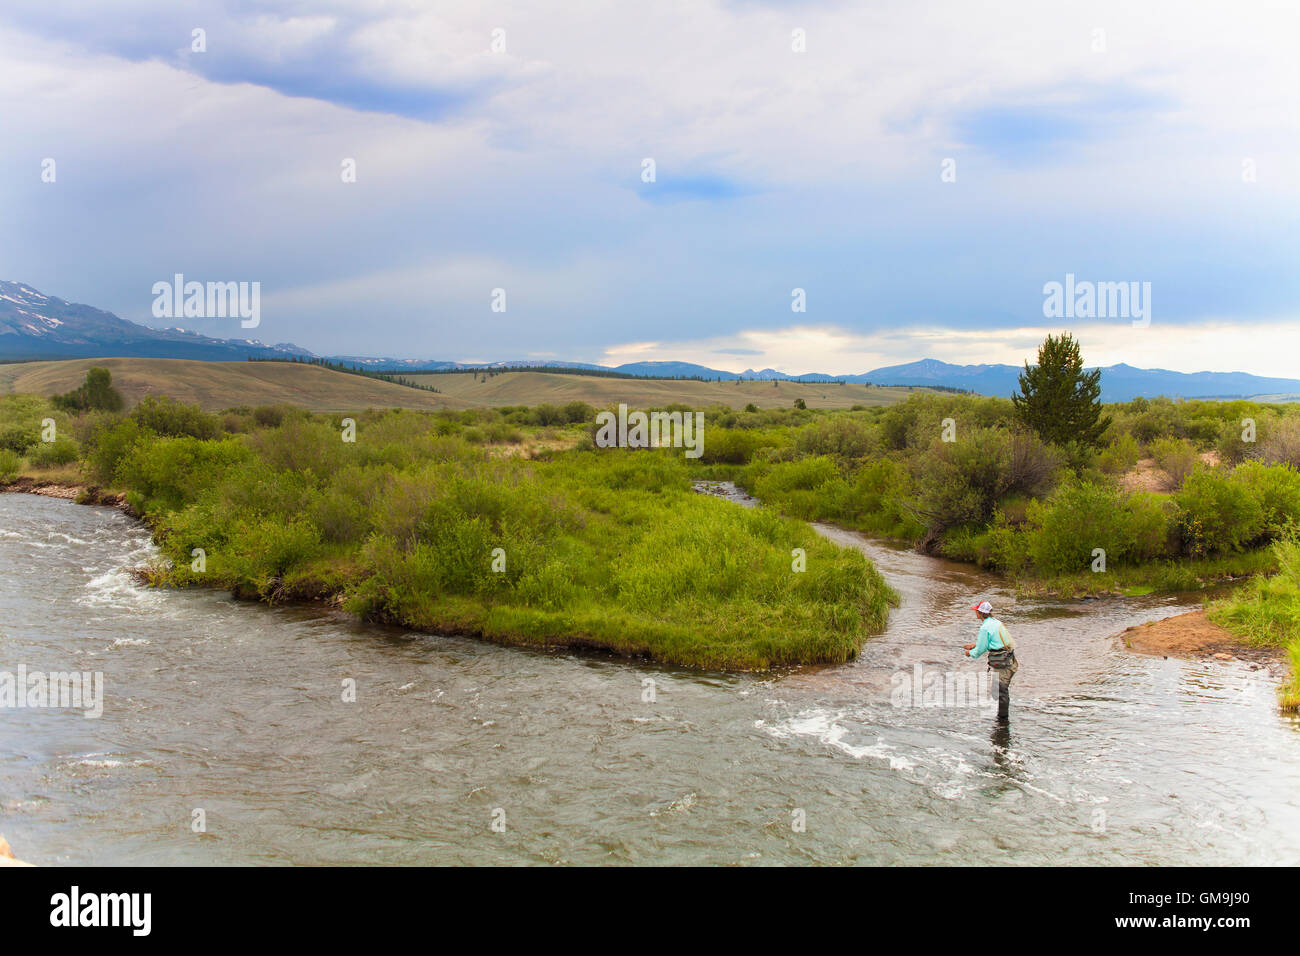 Colorado, Mid adult man fishing in river Stock Photo